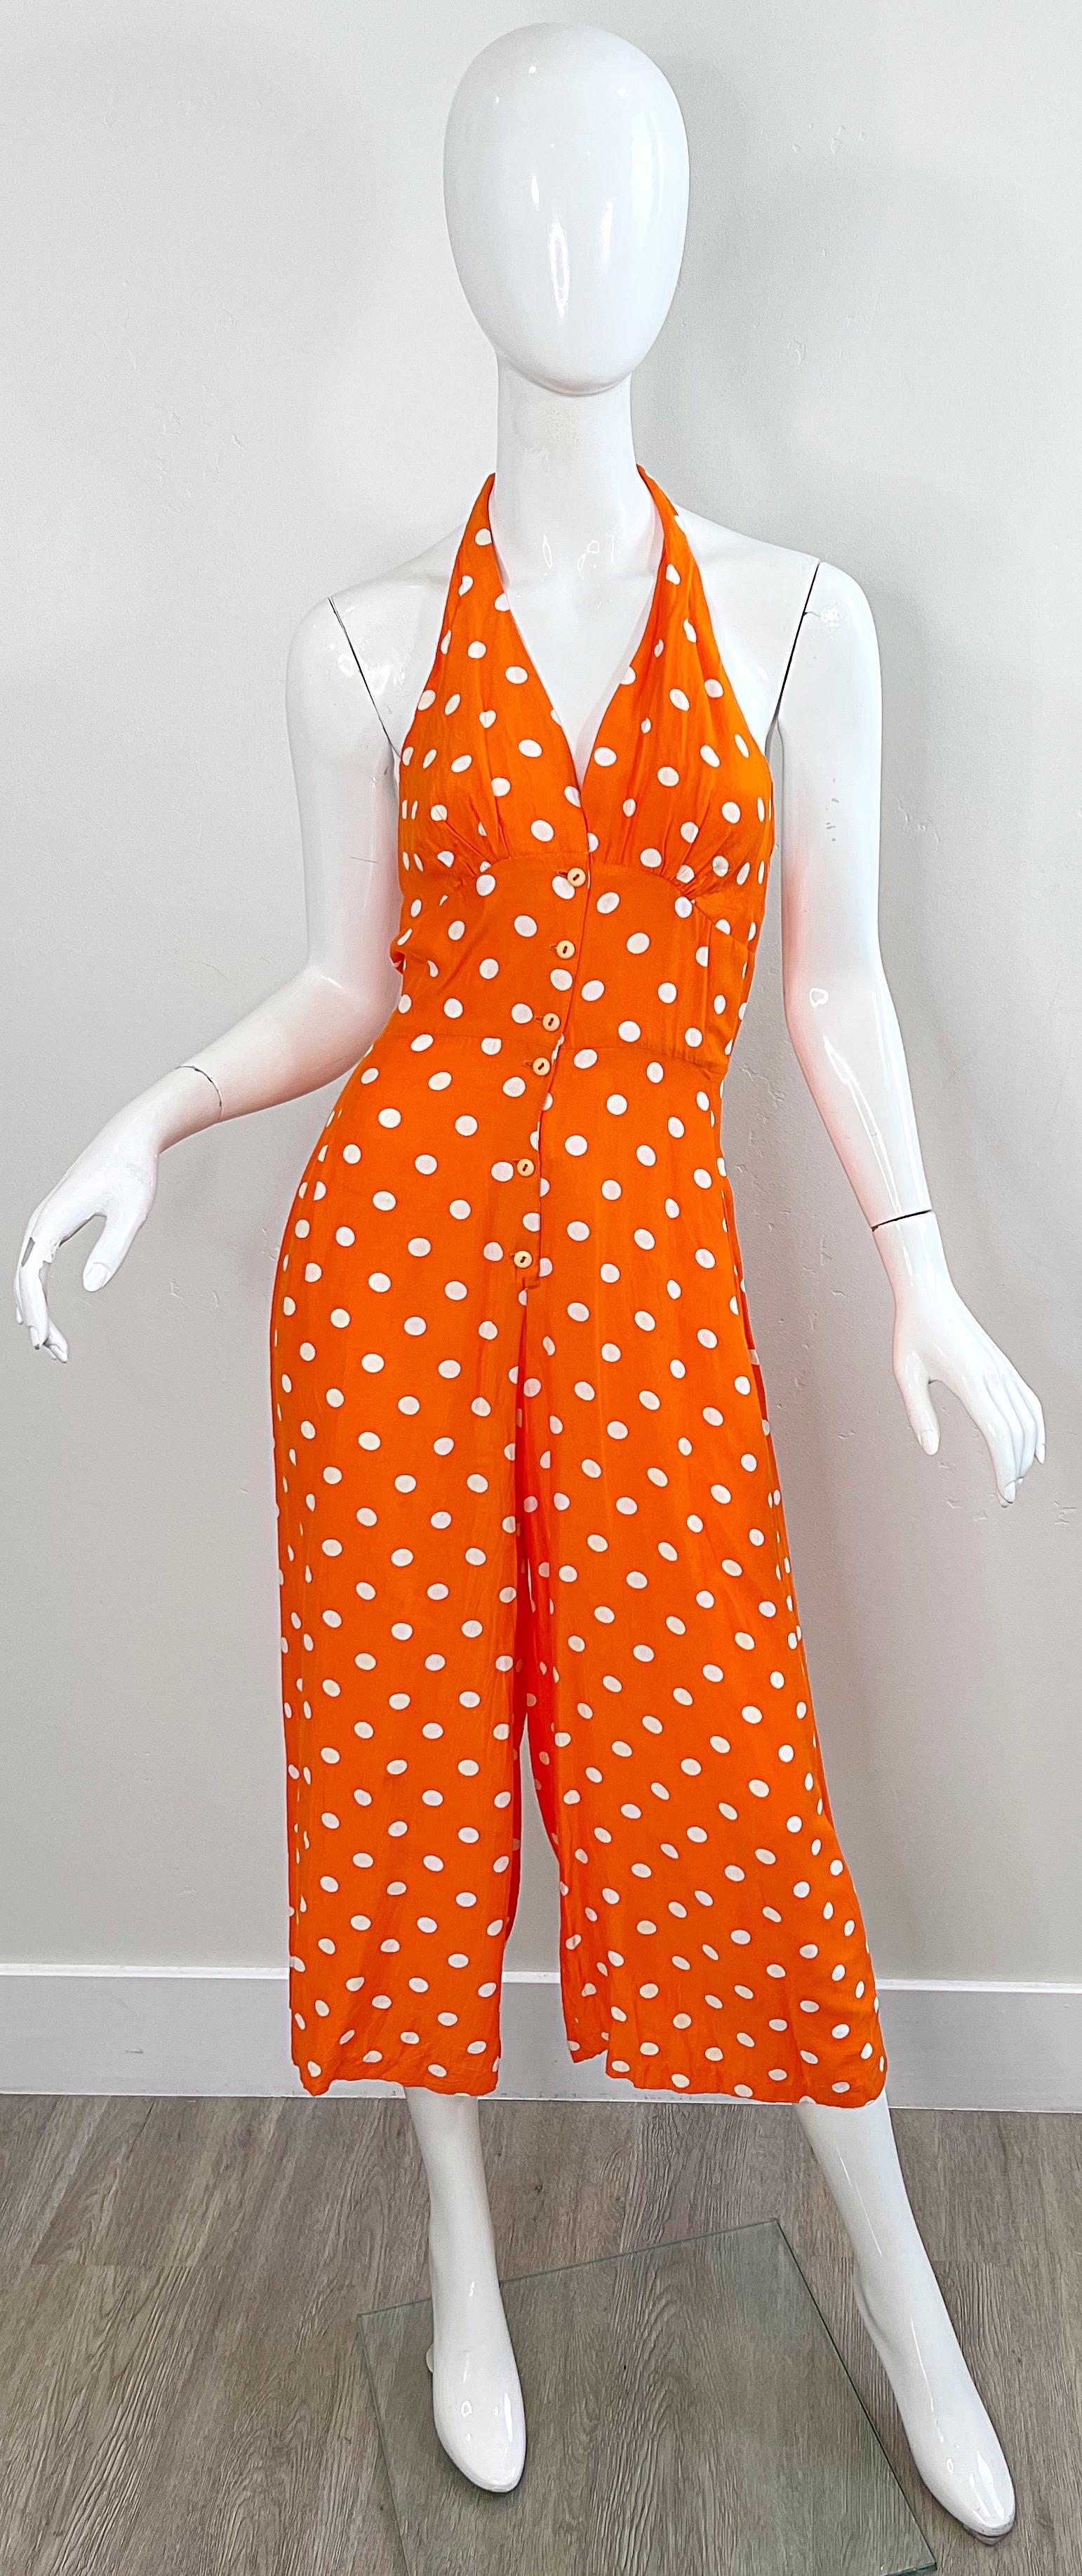 Beautiful early 90s bright orange and white polka dot halter culottes jumpsuit ! Soft lightweight rayon fabric. Buttons up the front, and ties at top center neck. The perfect alternative to a dress.
In great condition 
Made in USA
Approximately Size